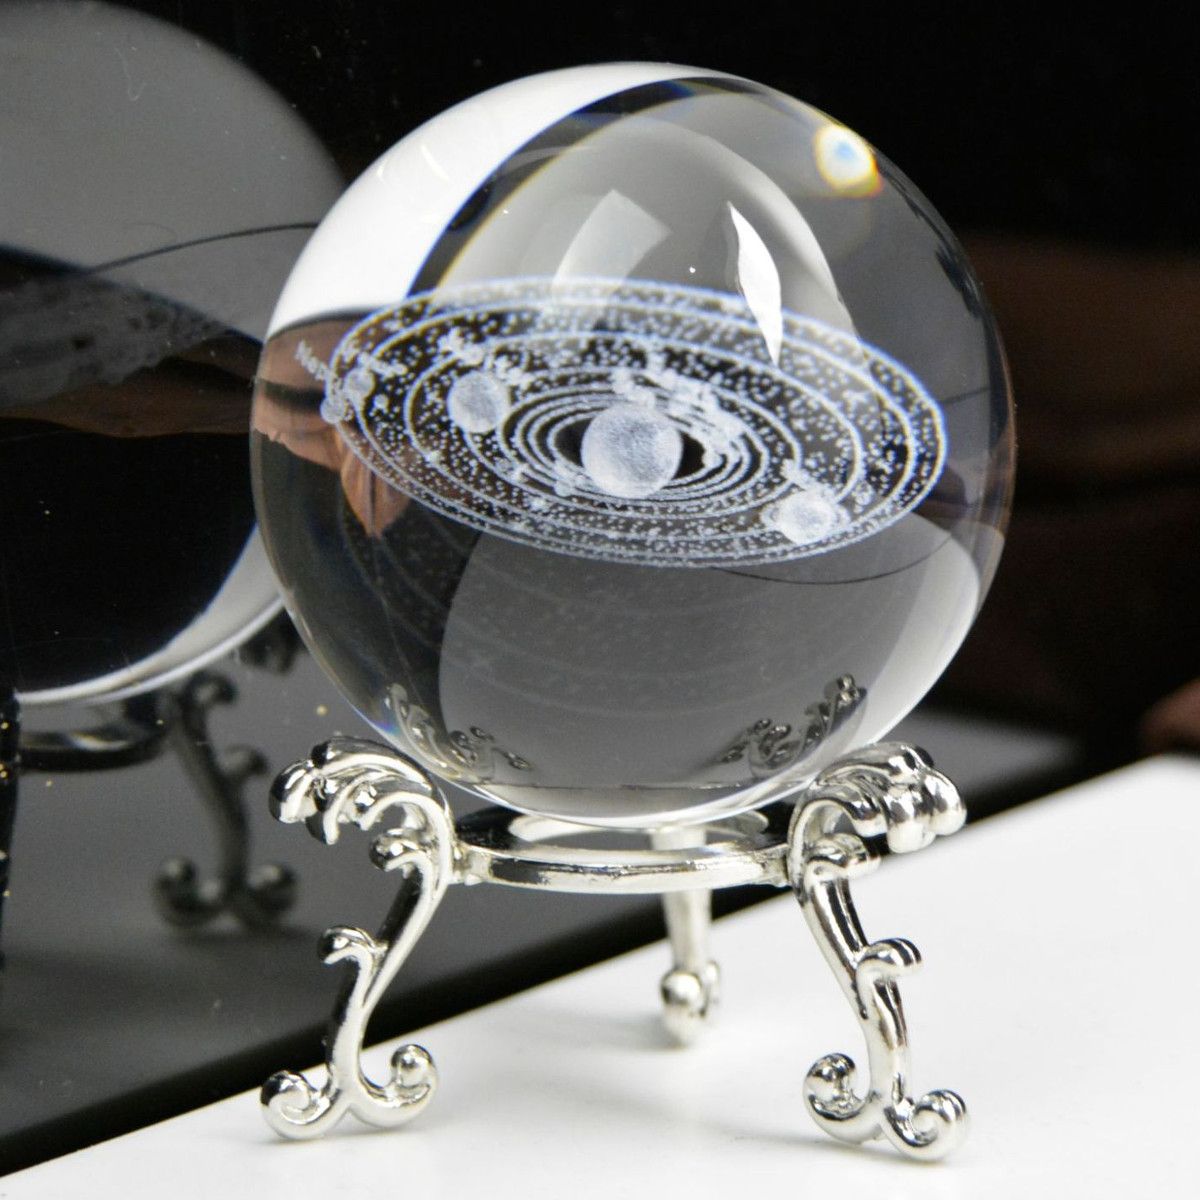 6cm-Engraved-Solar-System-Ball-3D-Miniature-Planets-Model-Crystal-Ball-Decorations--Stand-1531923